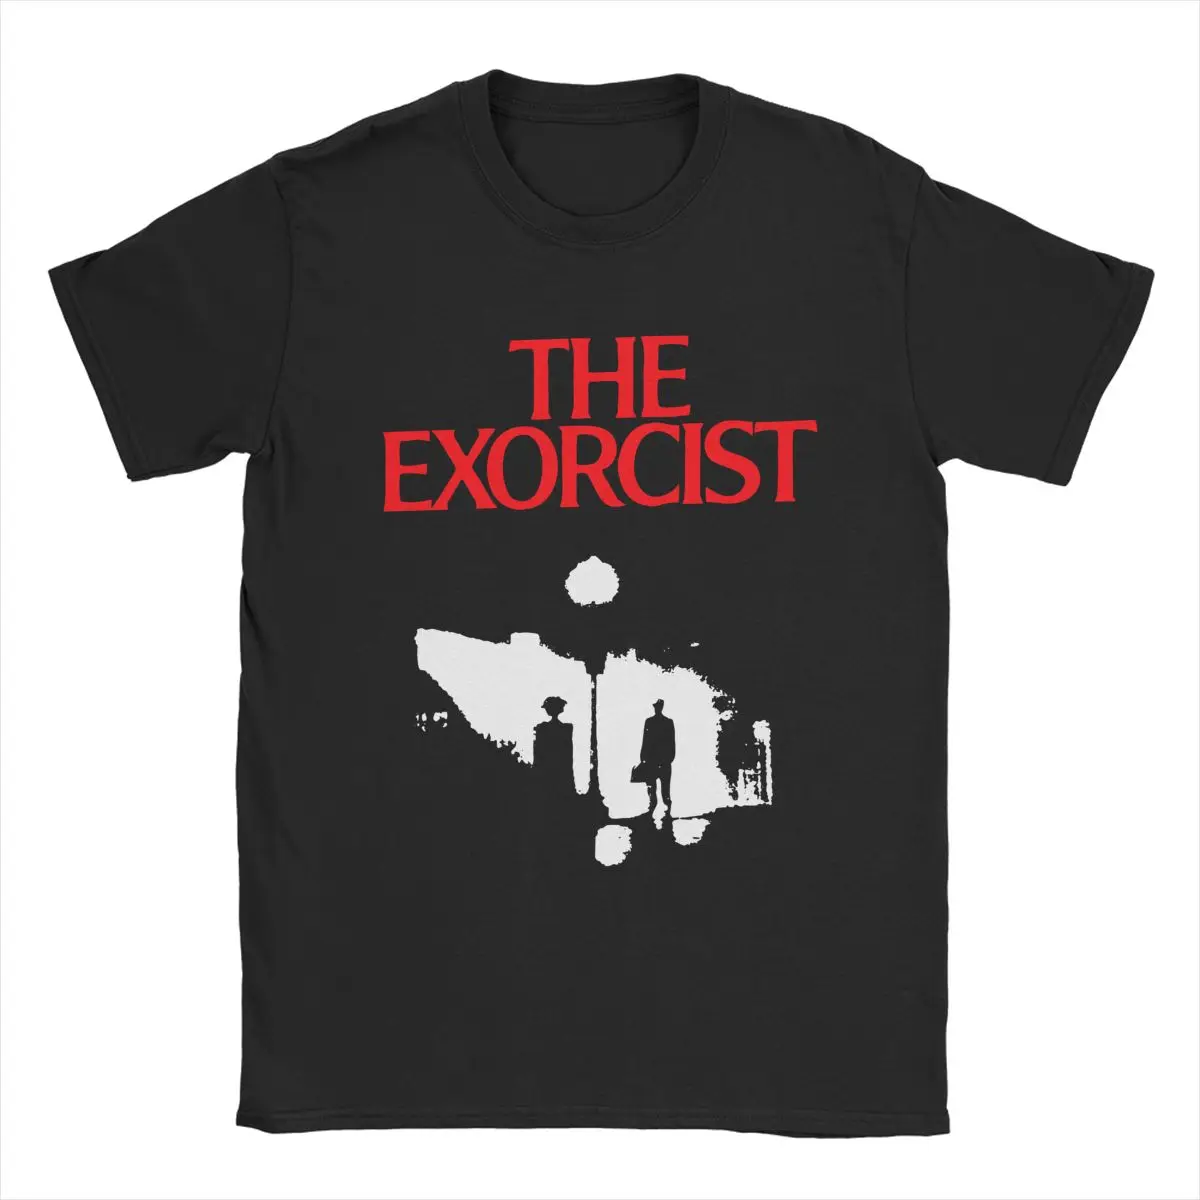 

Humor The Exorcist T-Shirts for Men Women Round Collar Cotton T Shirt Demonic Horror Movie Short Sleeve Tees New Arrival Clothes